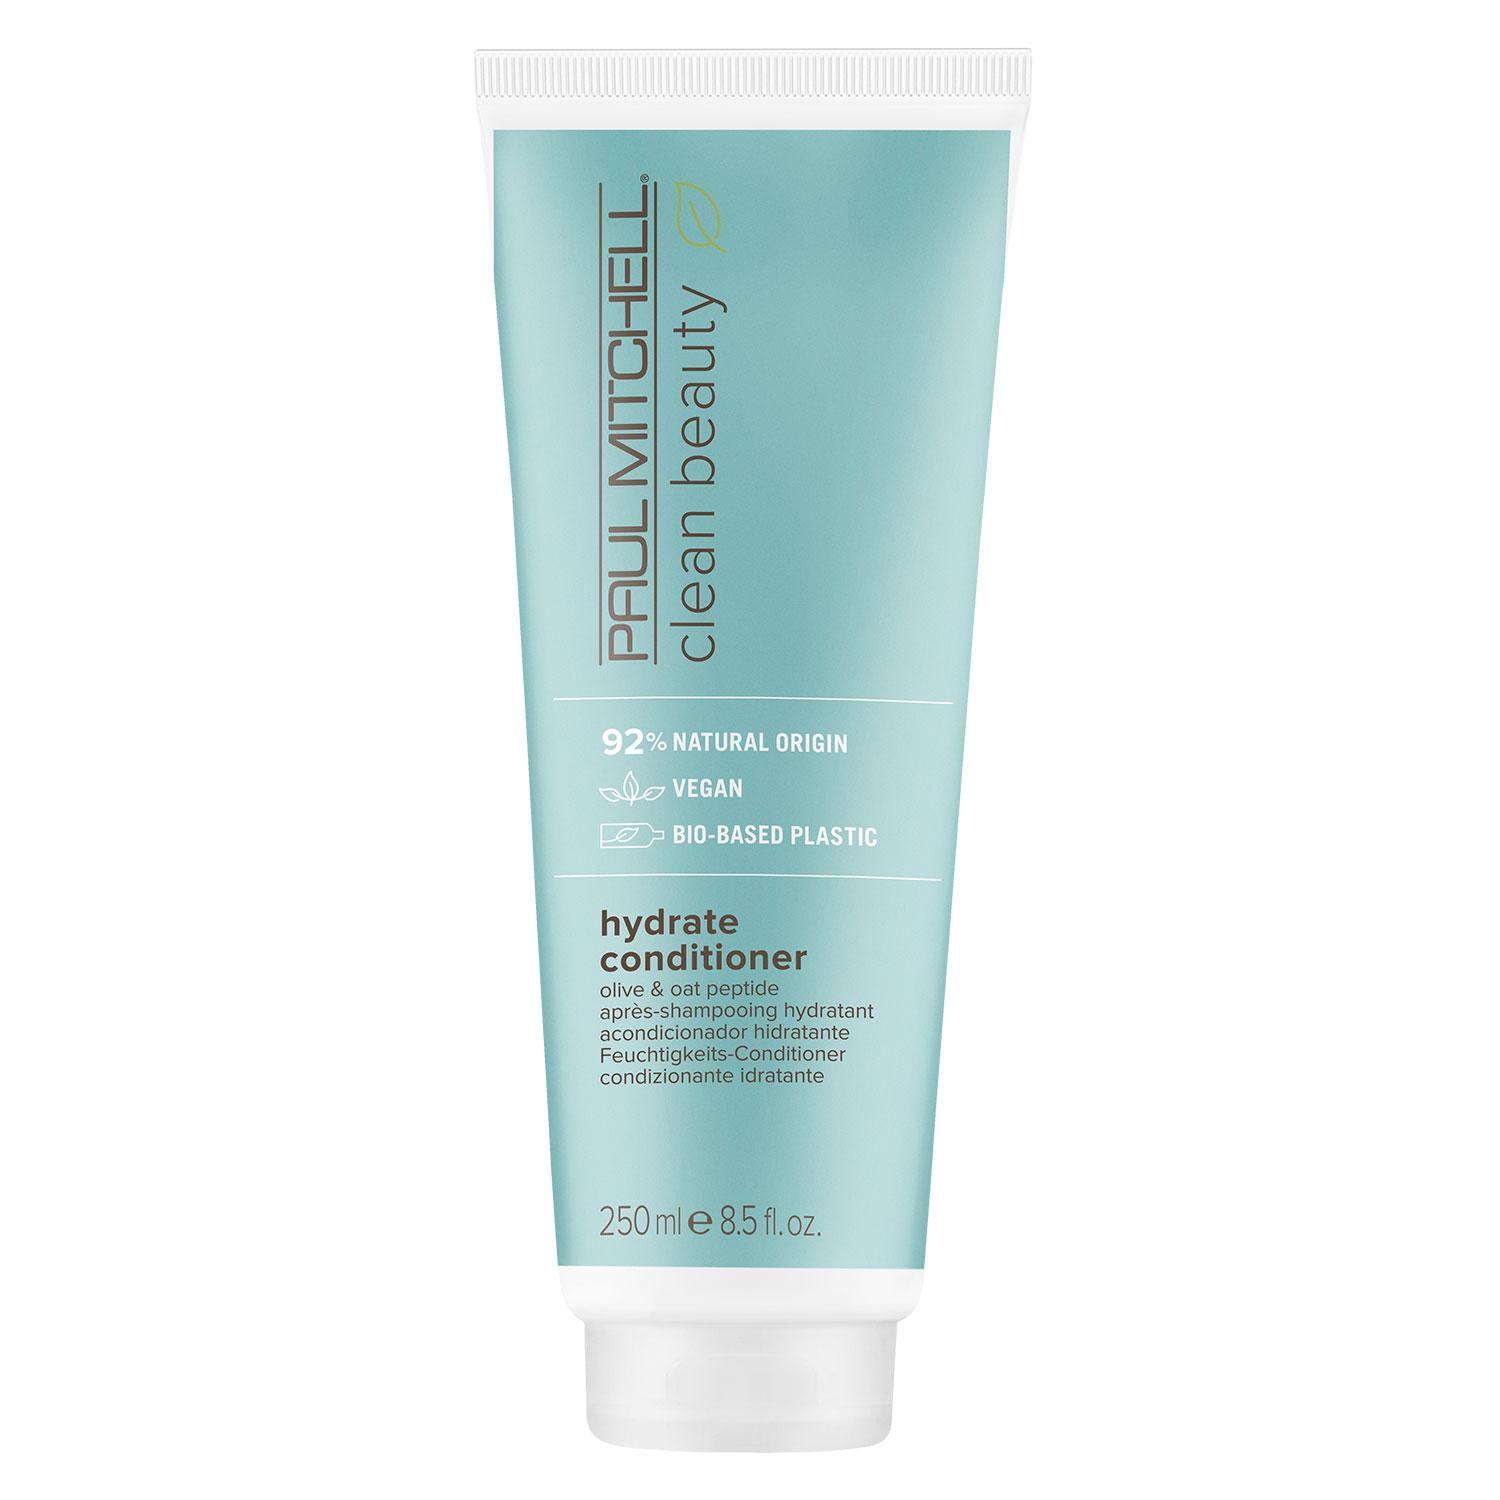 Paul Mitchell Clean Beauty - Hydrate Conditioner